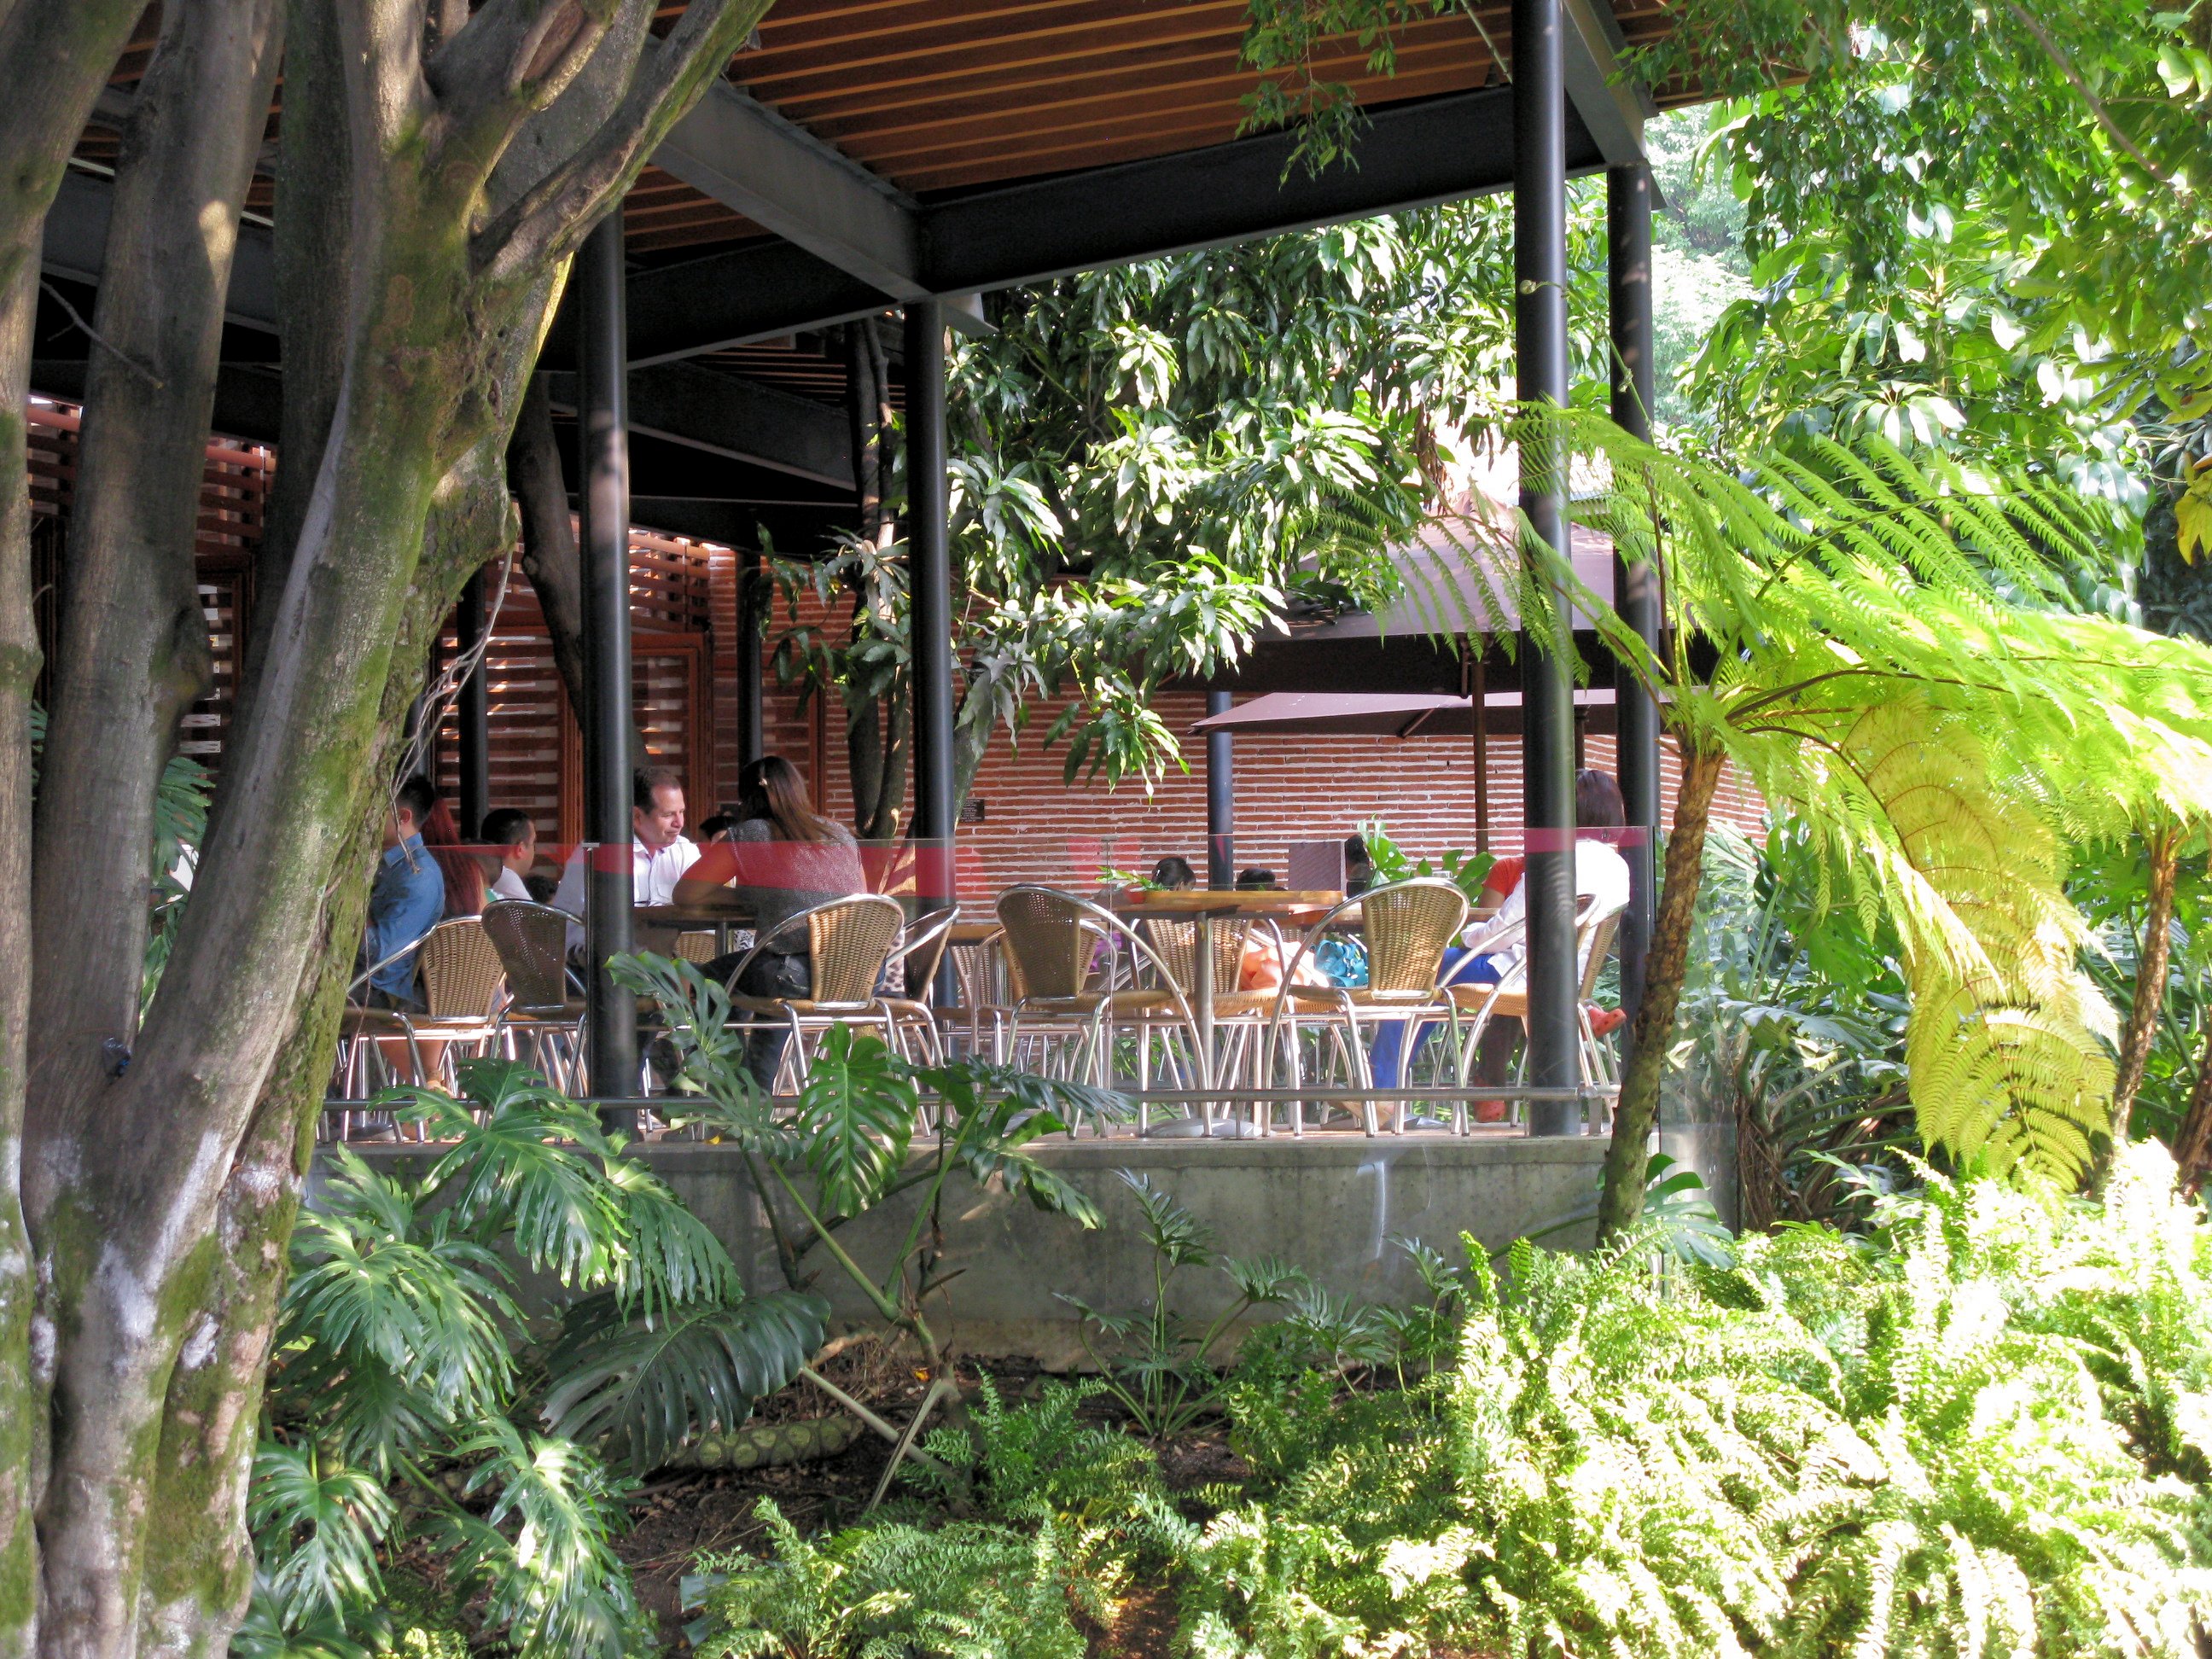 Sophisticated cafes in Medellin offer outdoor dining every day of the year